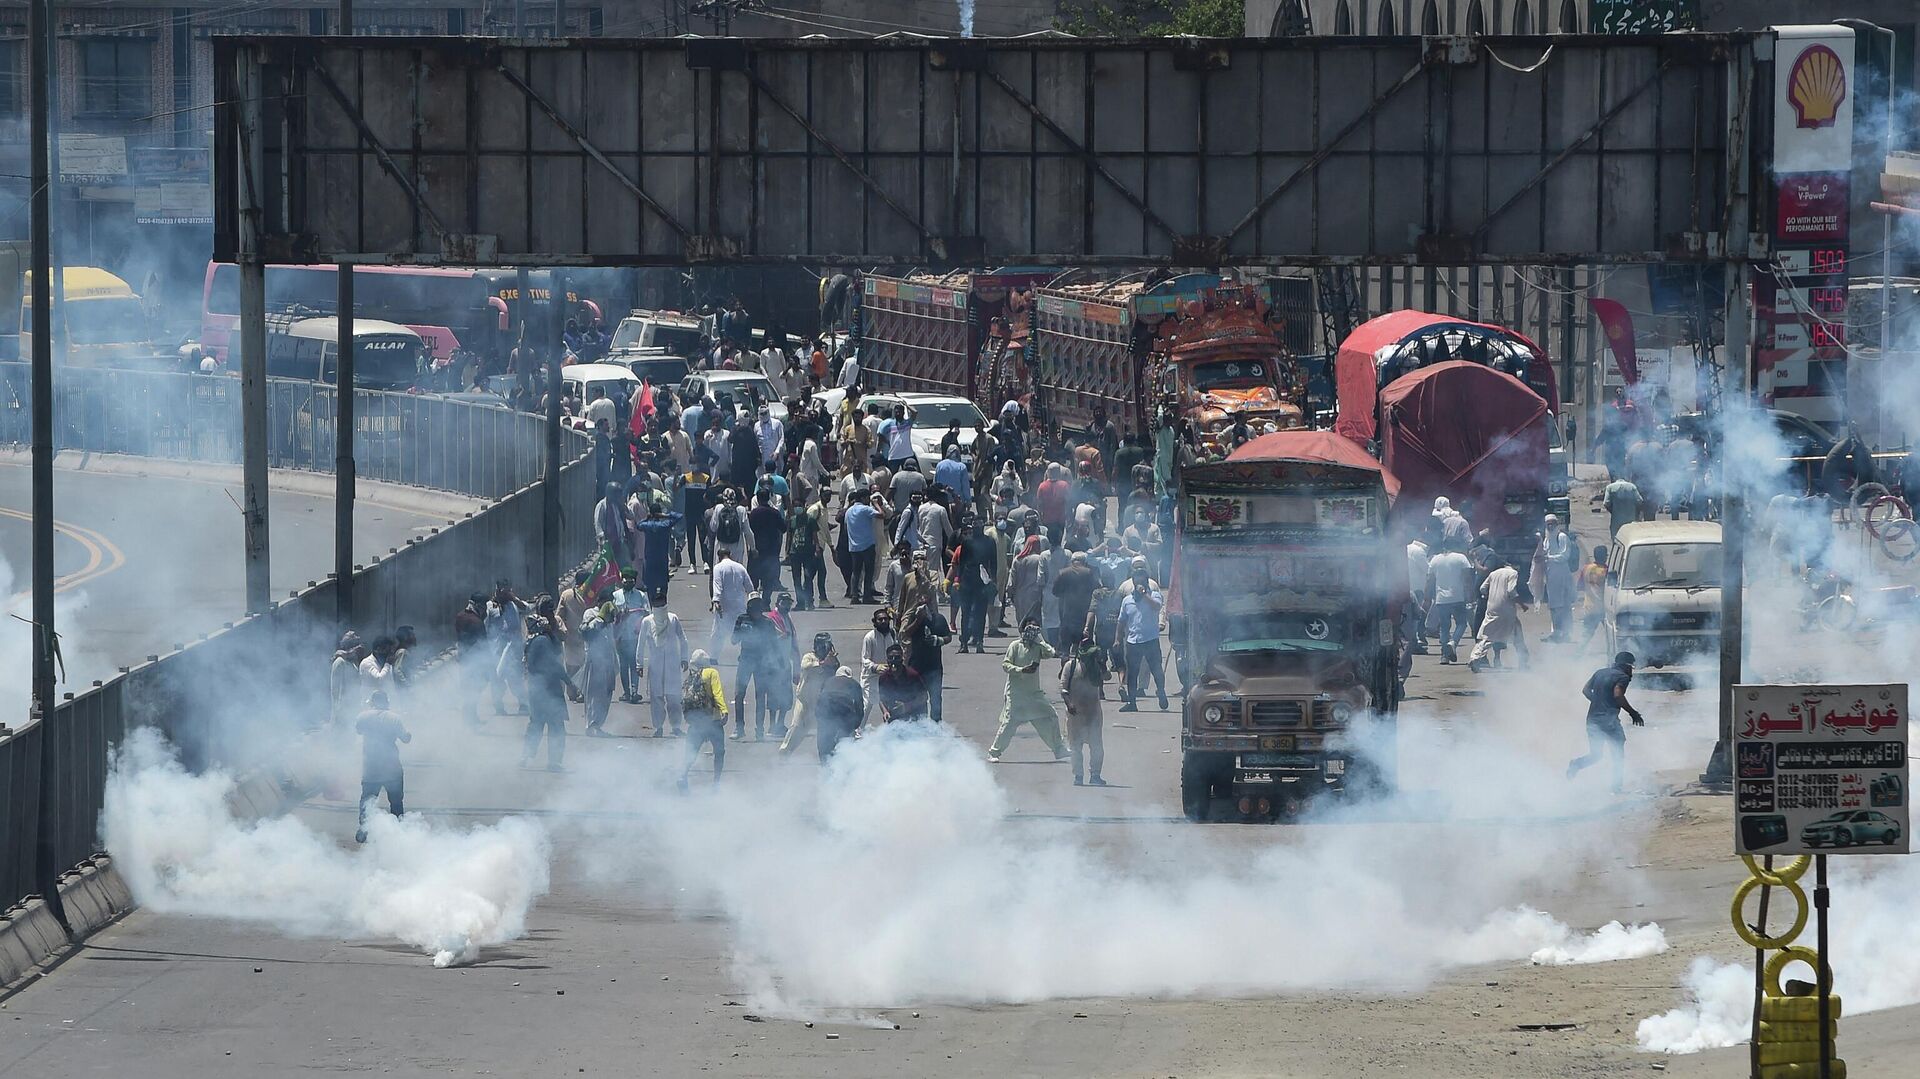 Police use tear gas to disperse activists of the Pakistan Tehreek-e-Insaf (PTI) party of ousted prime minister Imran Khan during a protest in Lahore on May 25, 2022 - Sputnik International, 1920, 25.05.2022